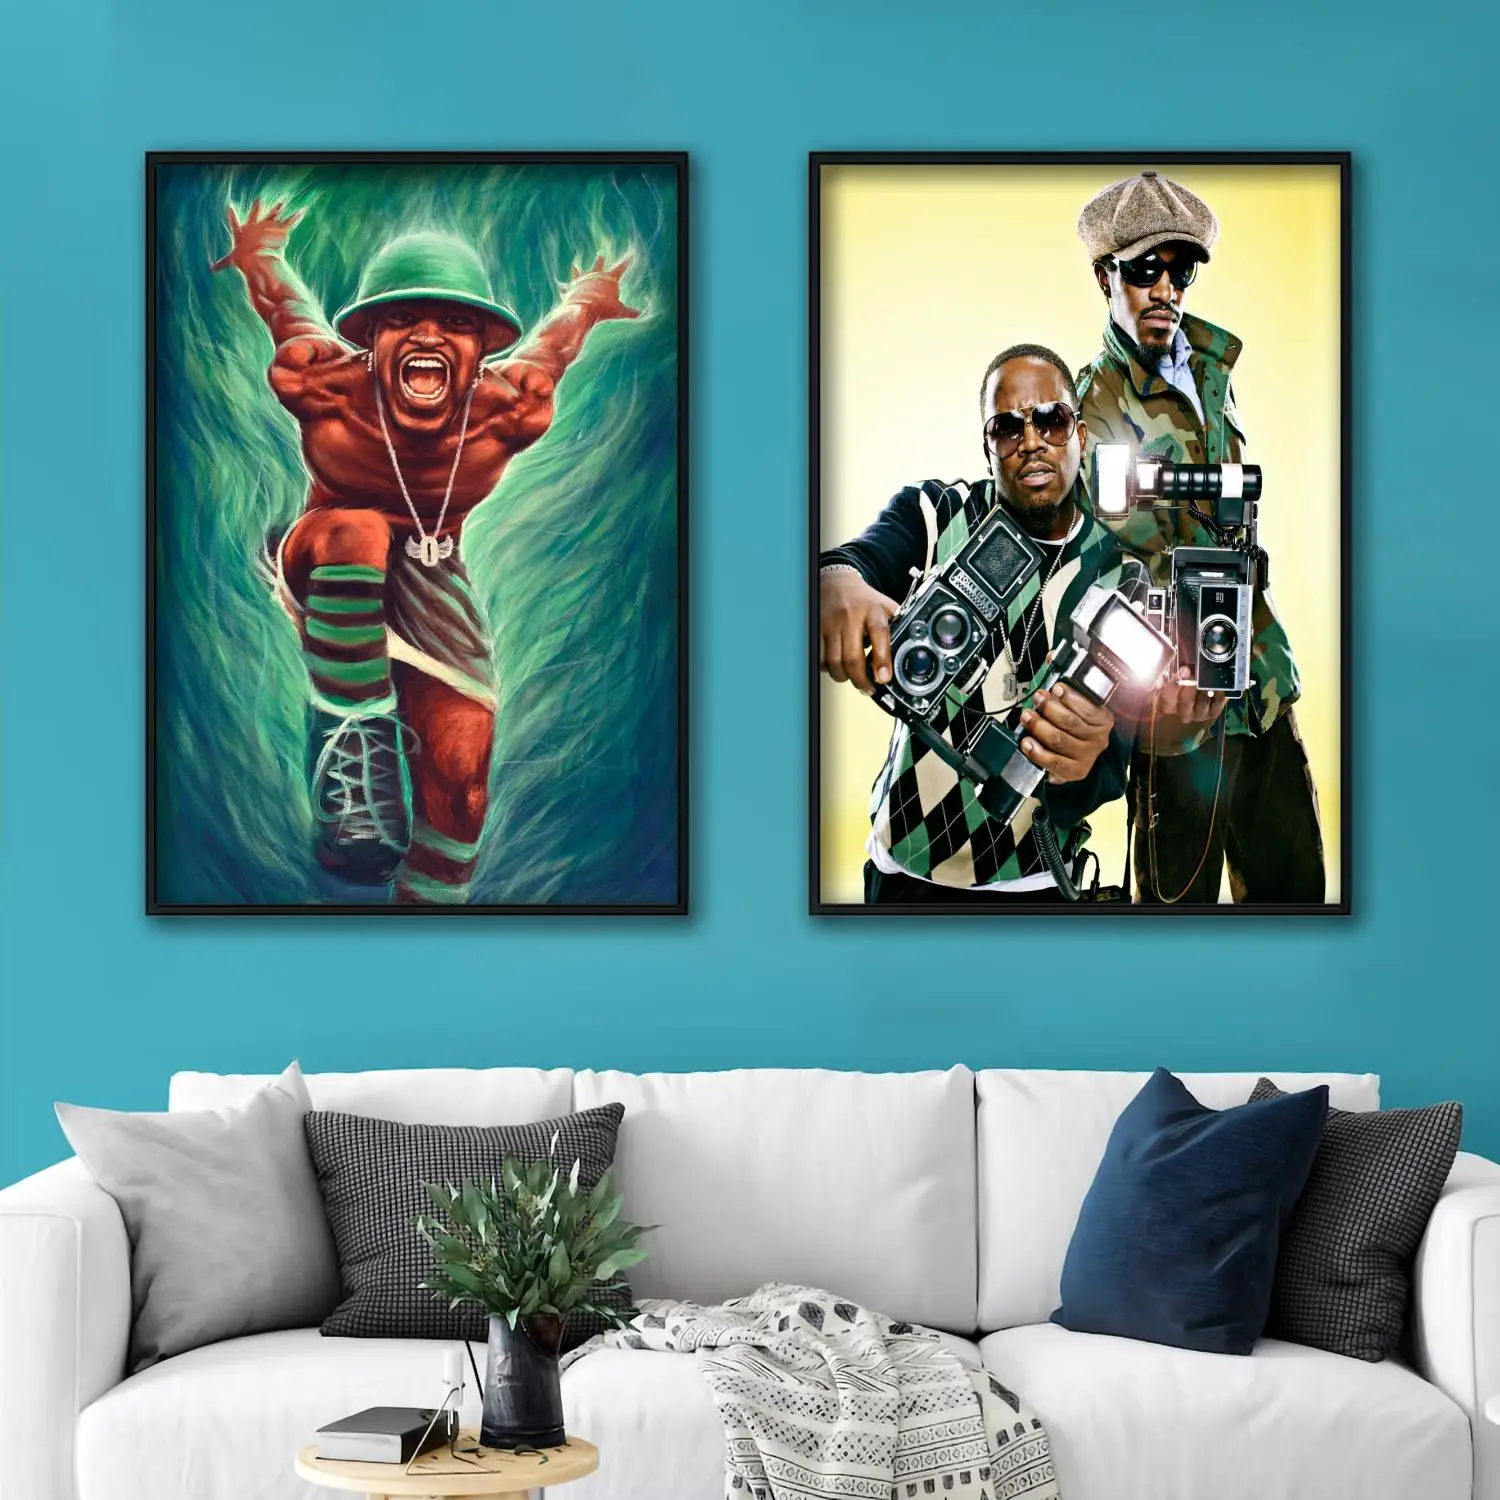 

outkast Singer Decorative Canvas Posters Room Bar Cafe Decor Gift Print Art Wall Paintings